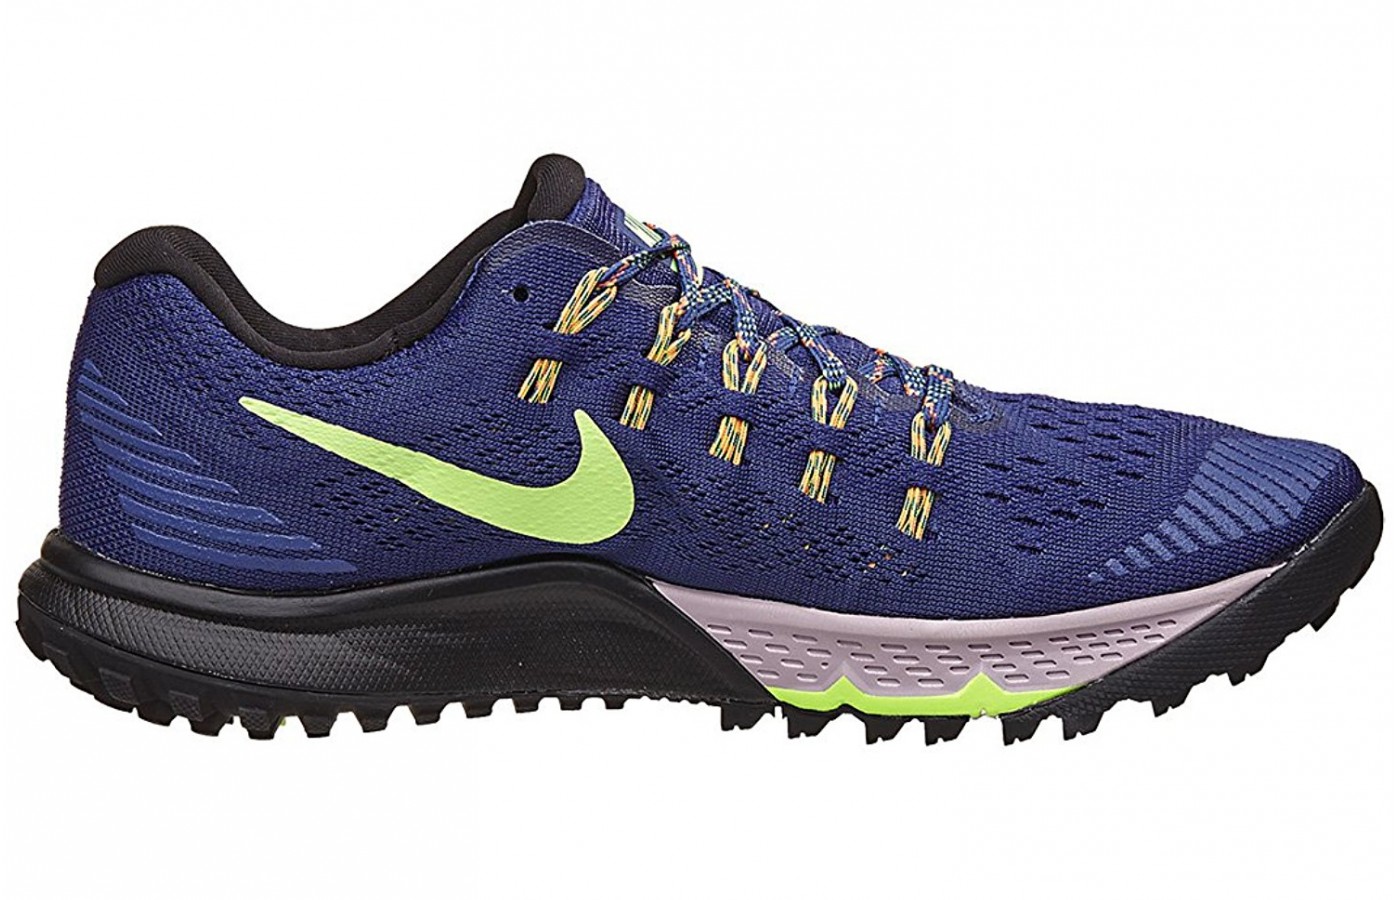 A side view of the Nike Air Zoom Terra Kiger 3 Running Shoe